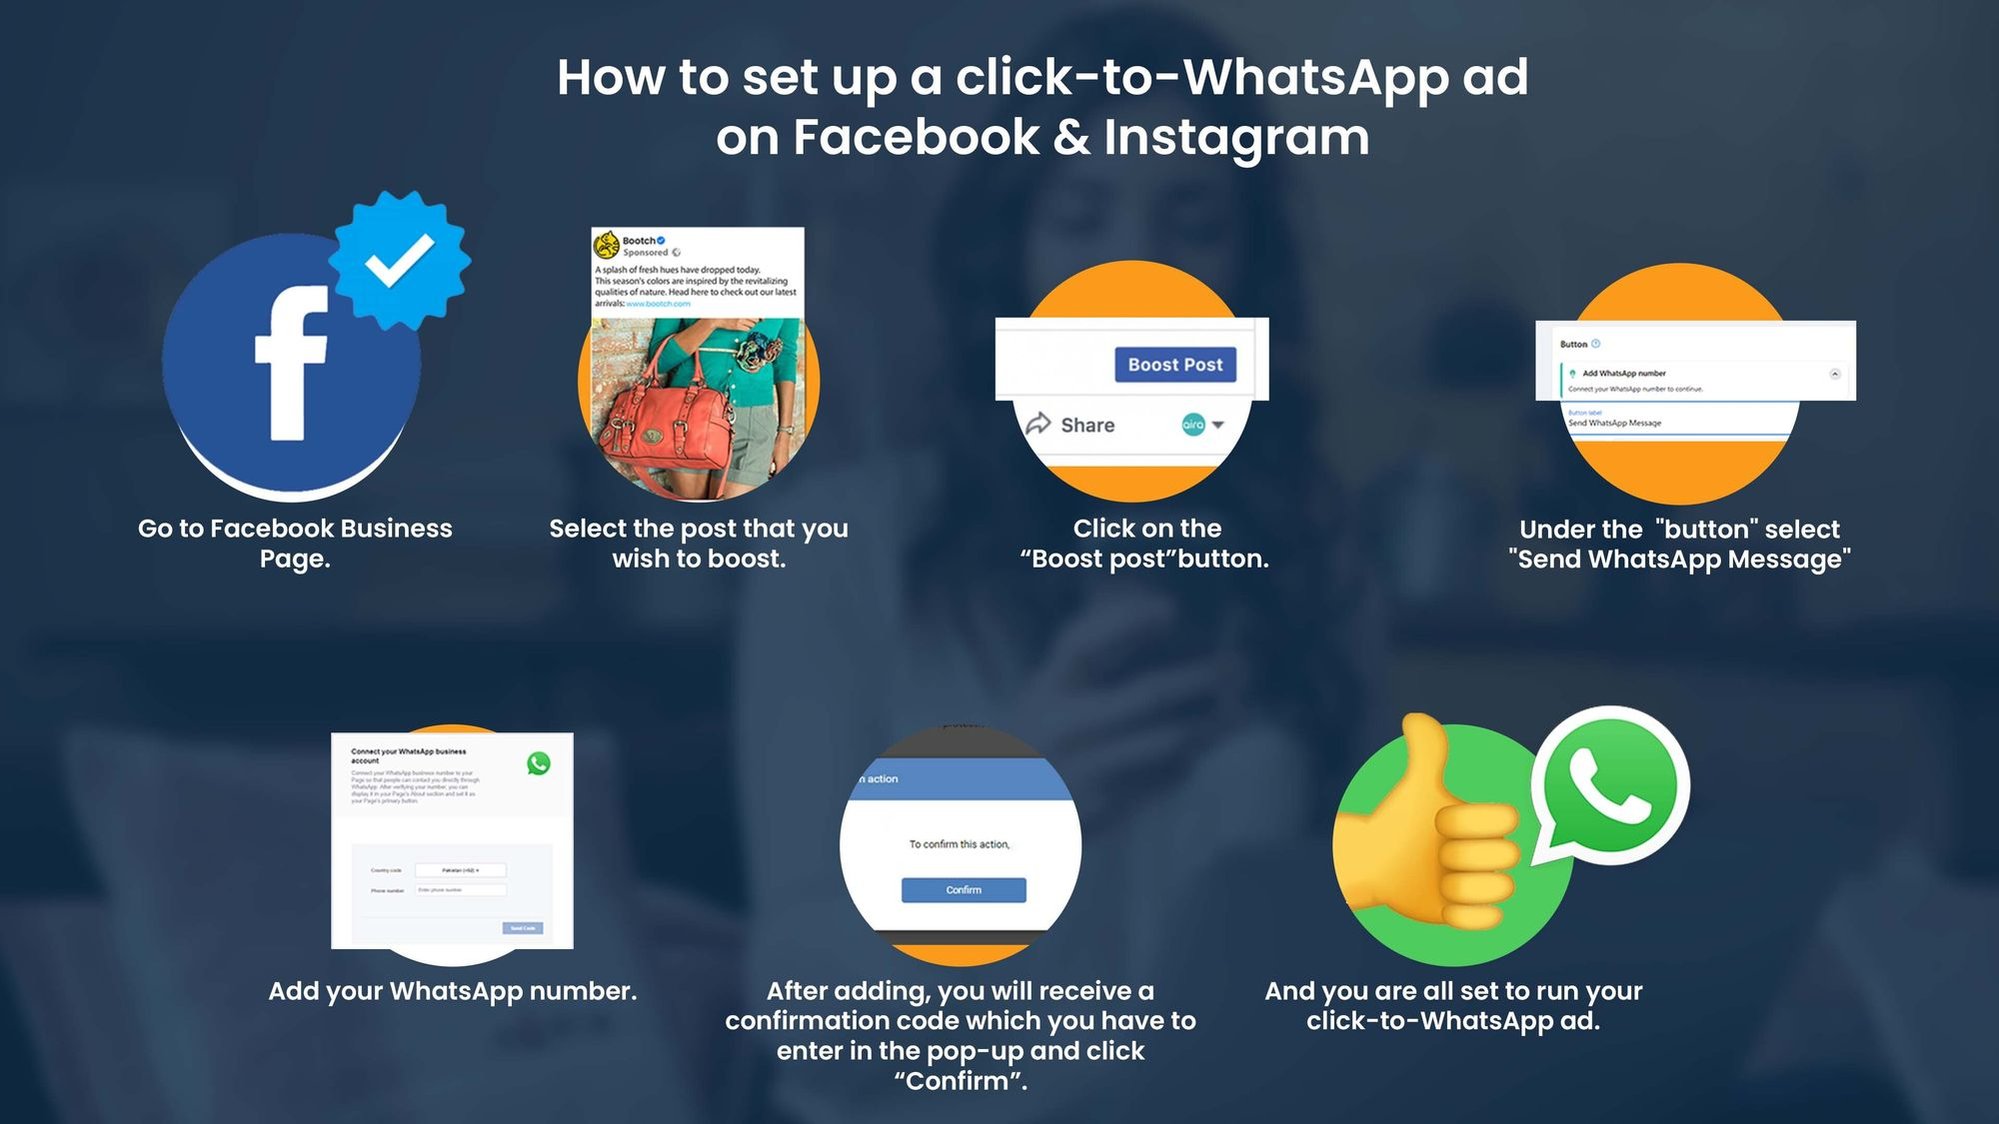 How to set up Click-to-WhatsApp ads on Facebook and Instagram